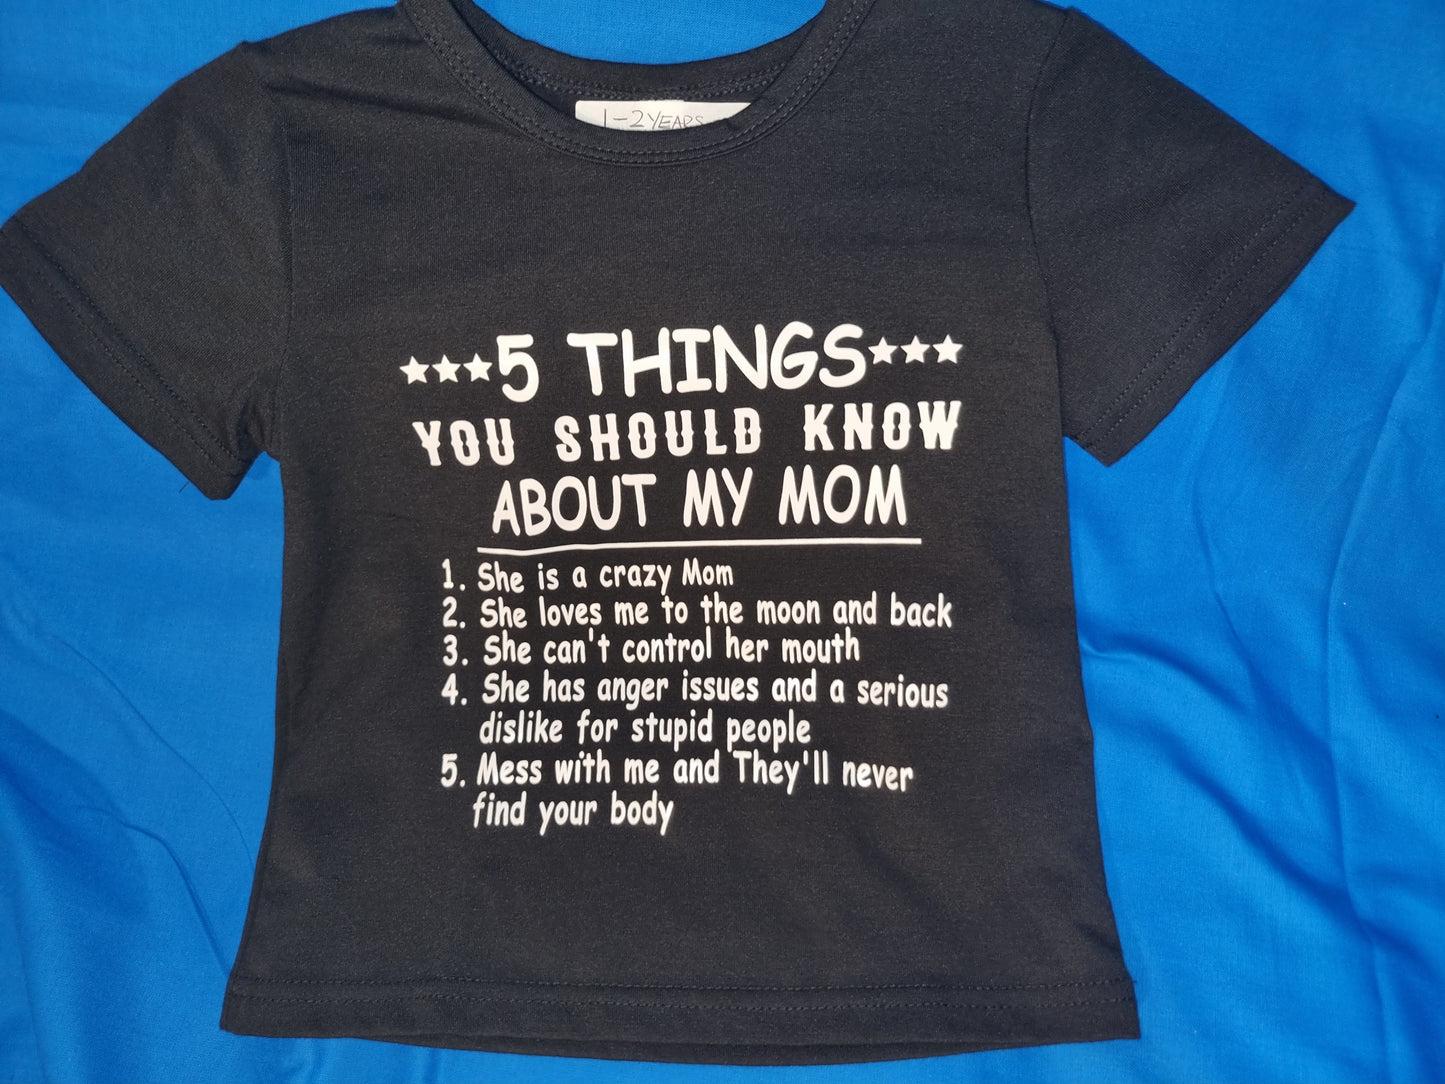 3-4 YEAR OLD CHILDRENS T-SHIRT